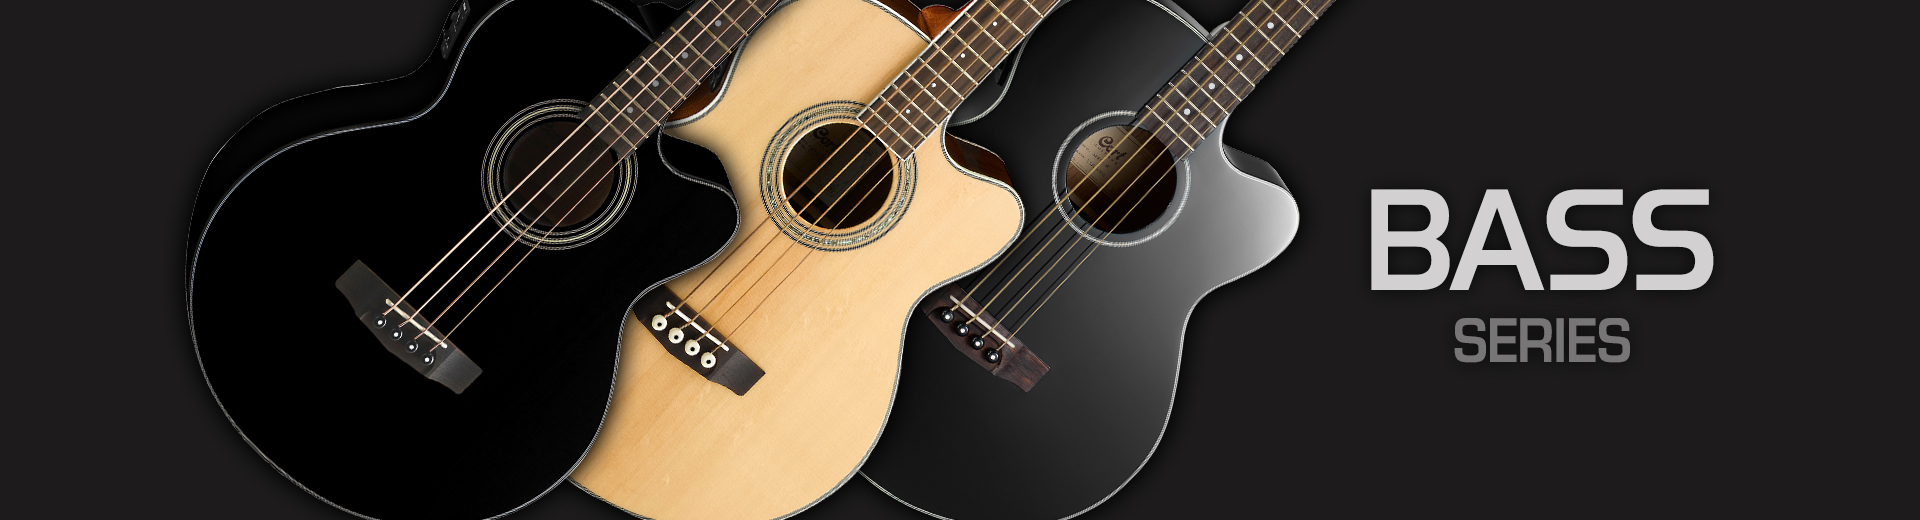 Cort Acoustic Bass Series